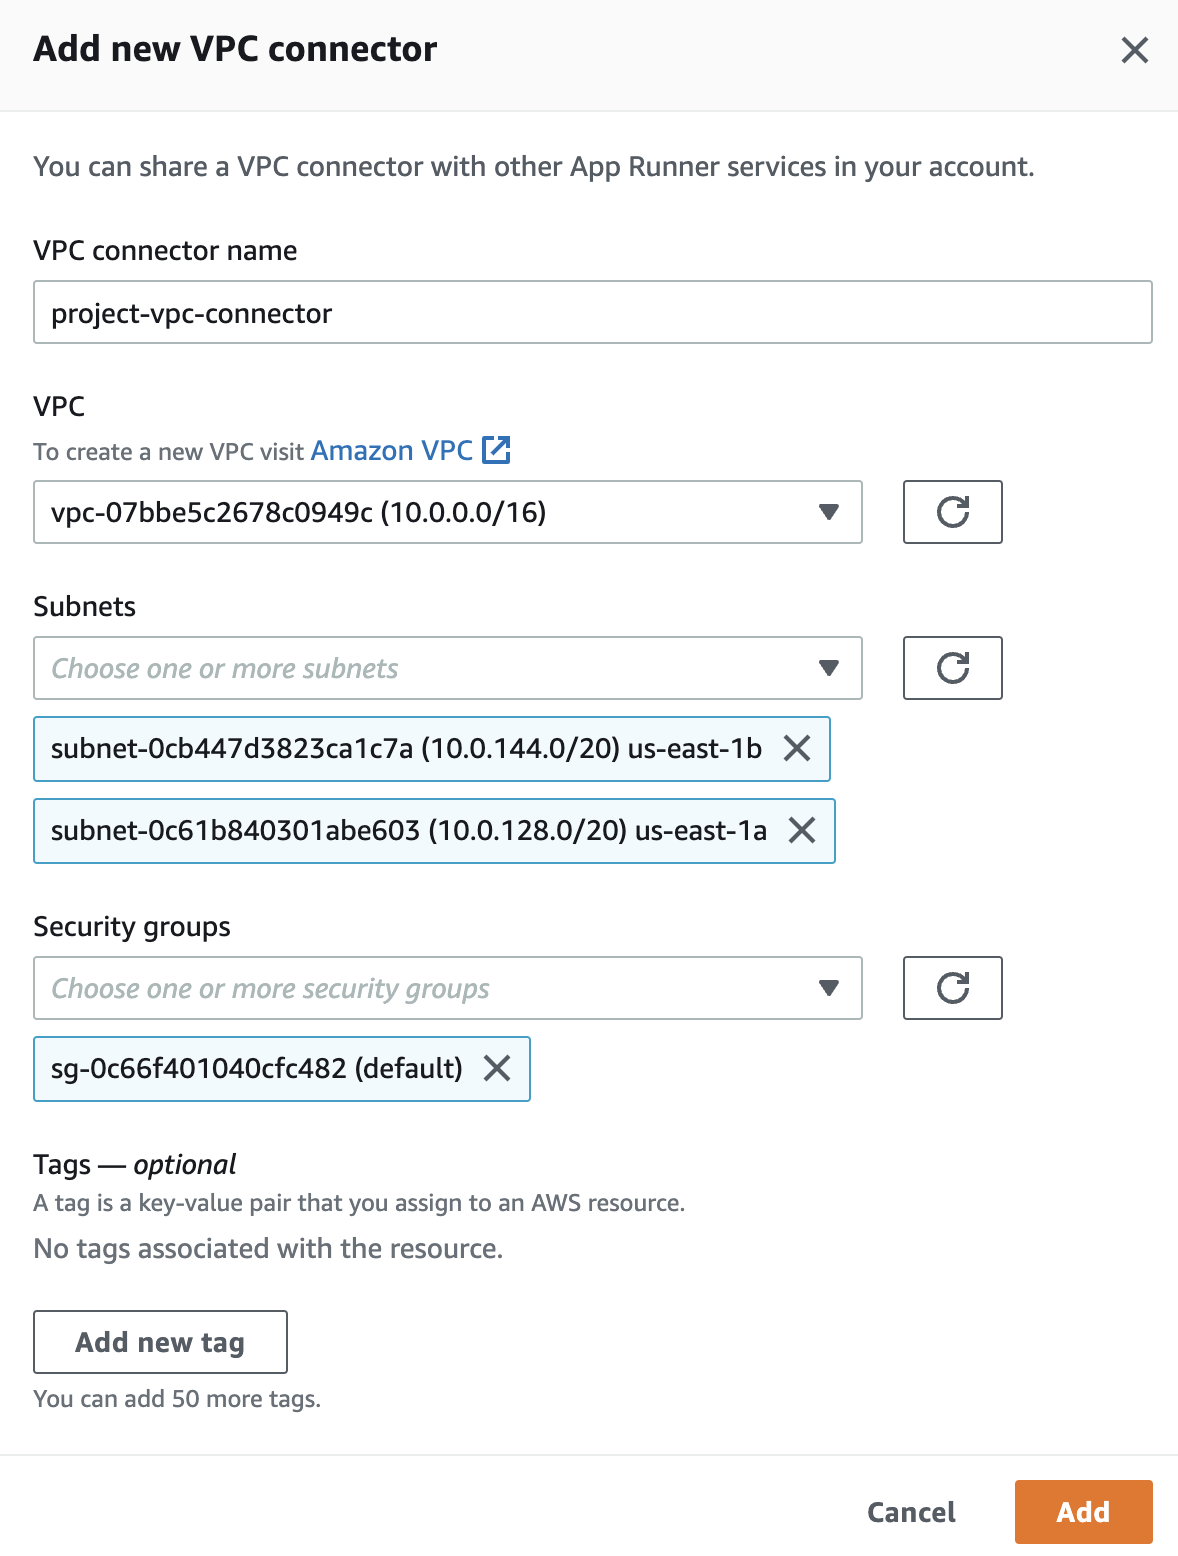 Screenshot of the "Add new VPC connector" screen on the App Runner setup page within the AWS console. The "VPC  connector name" is set to "project-vpc-connector". Under "VPC", the VPC you created is listed. Under "Subnets", the VPC's two private subnets are listed. Under "Security groups", the default security group is listed.